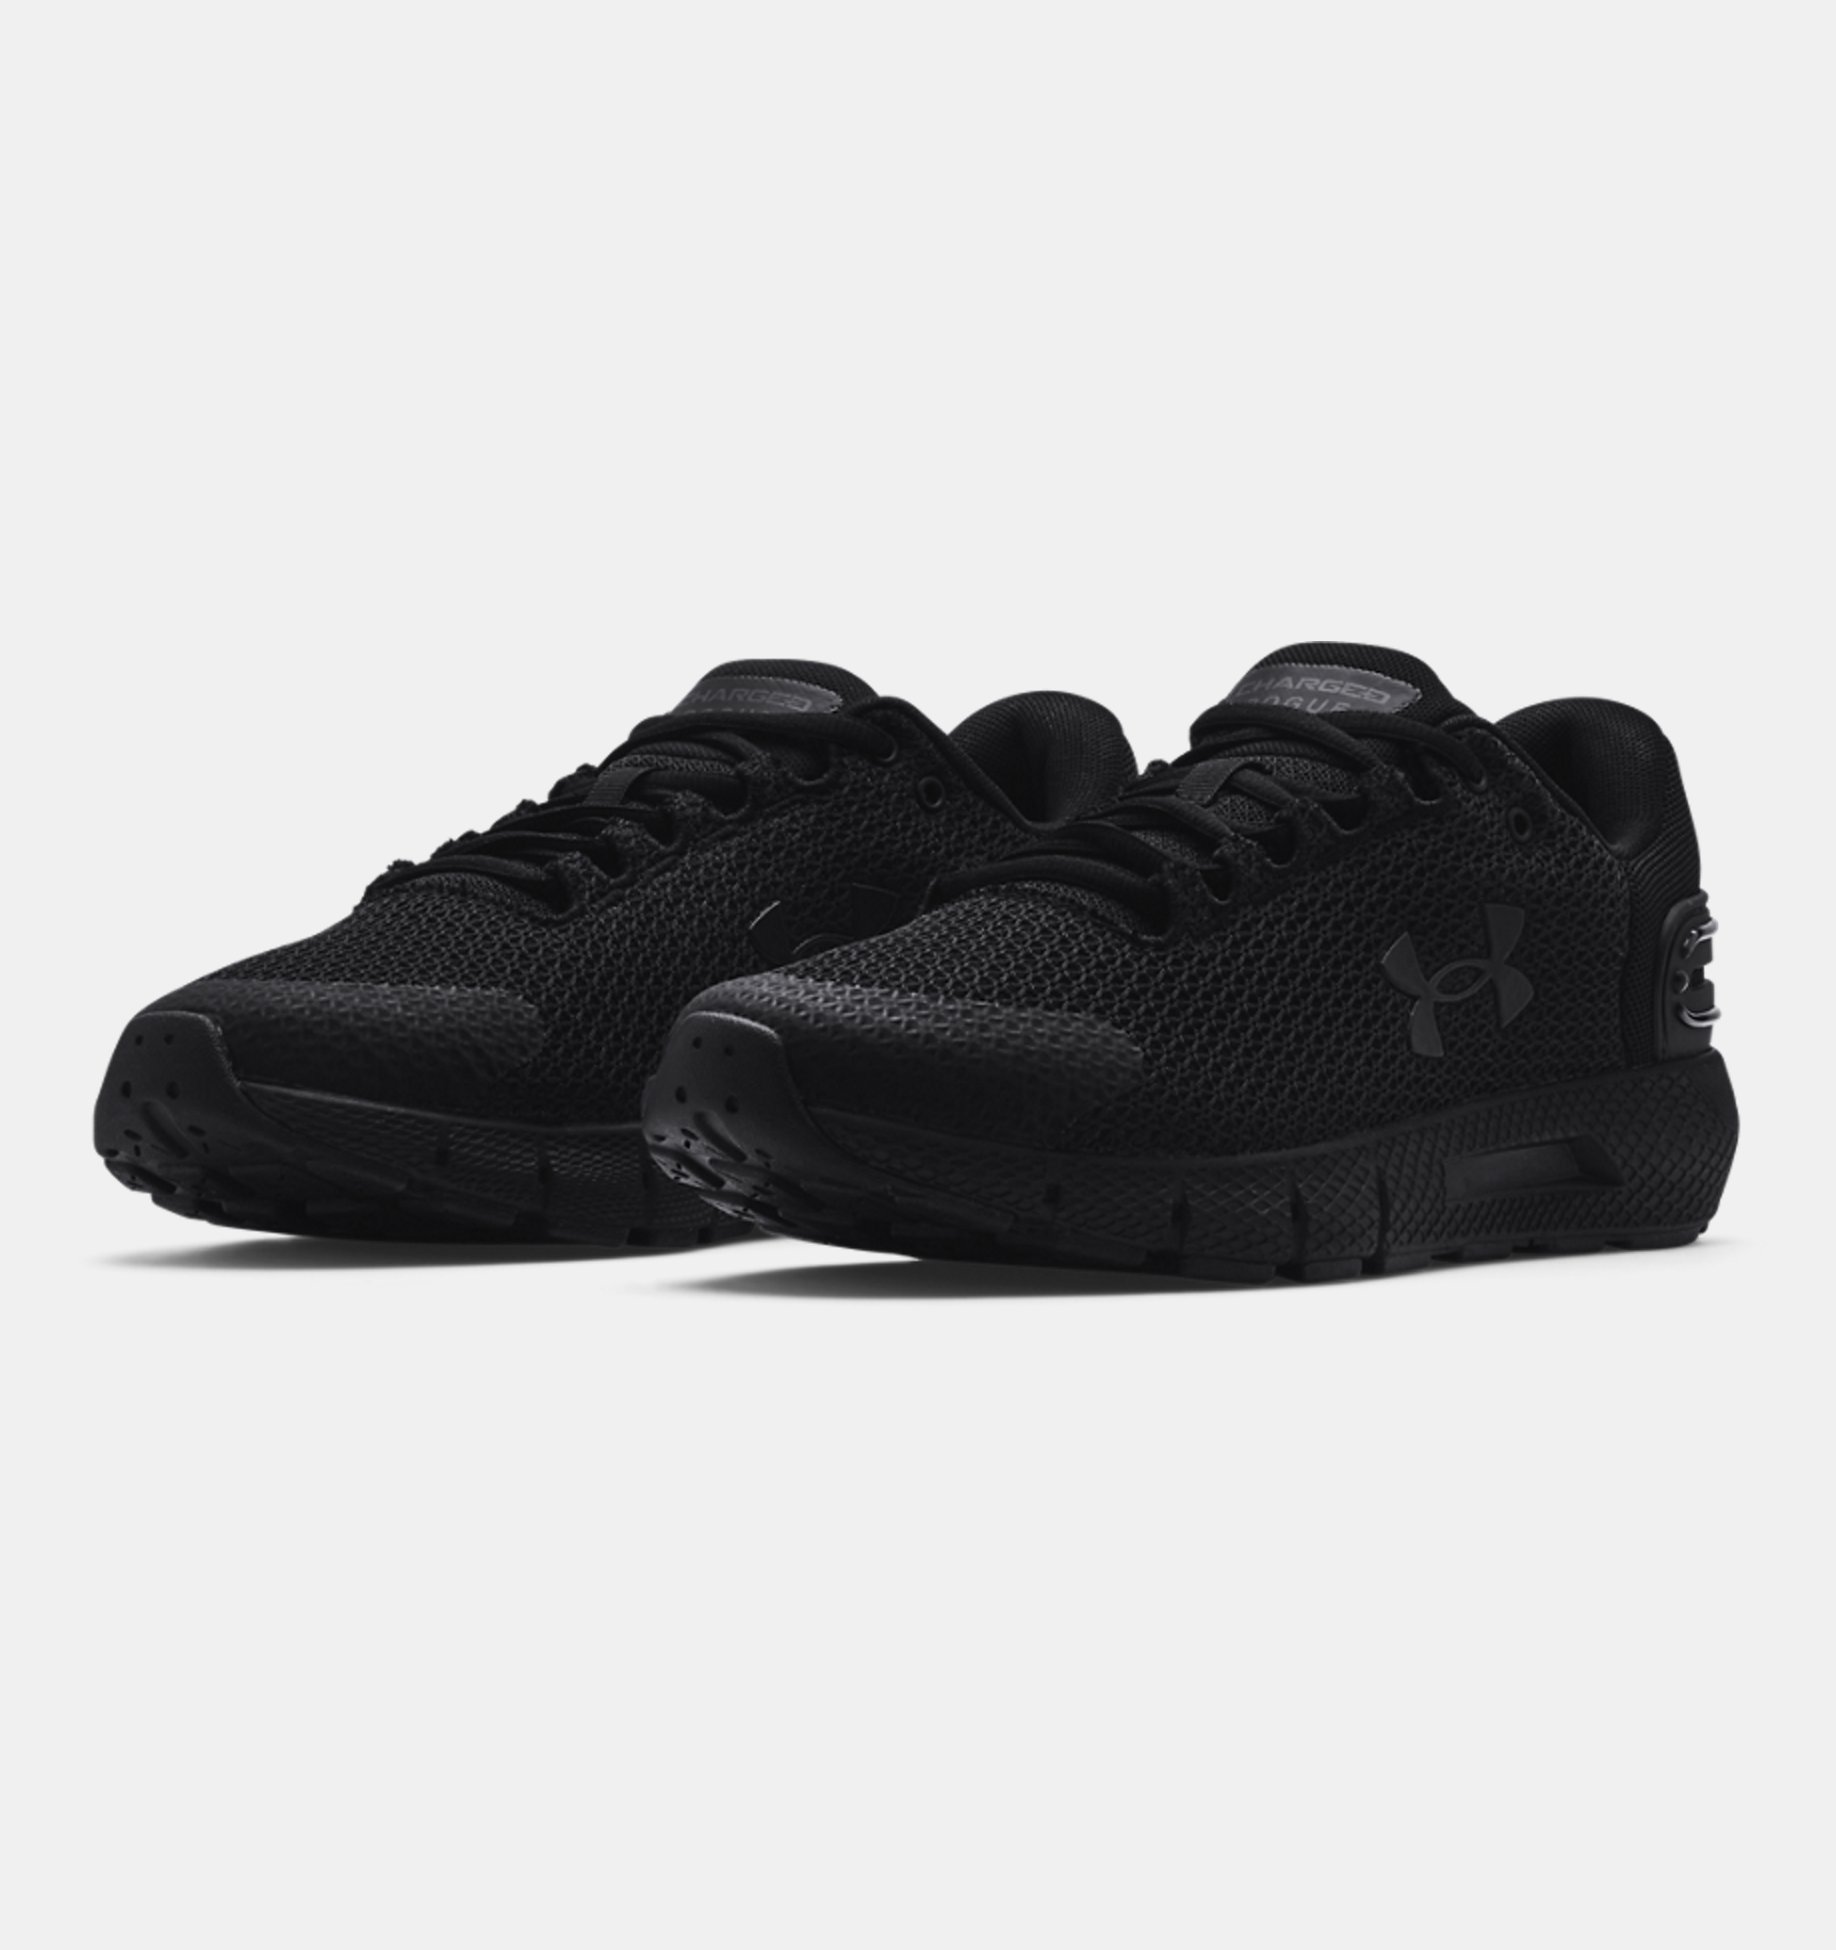 Black Sports Under Armour Mens Charged Rogue 2 Running Shoes Trainers Sneakers 